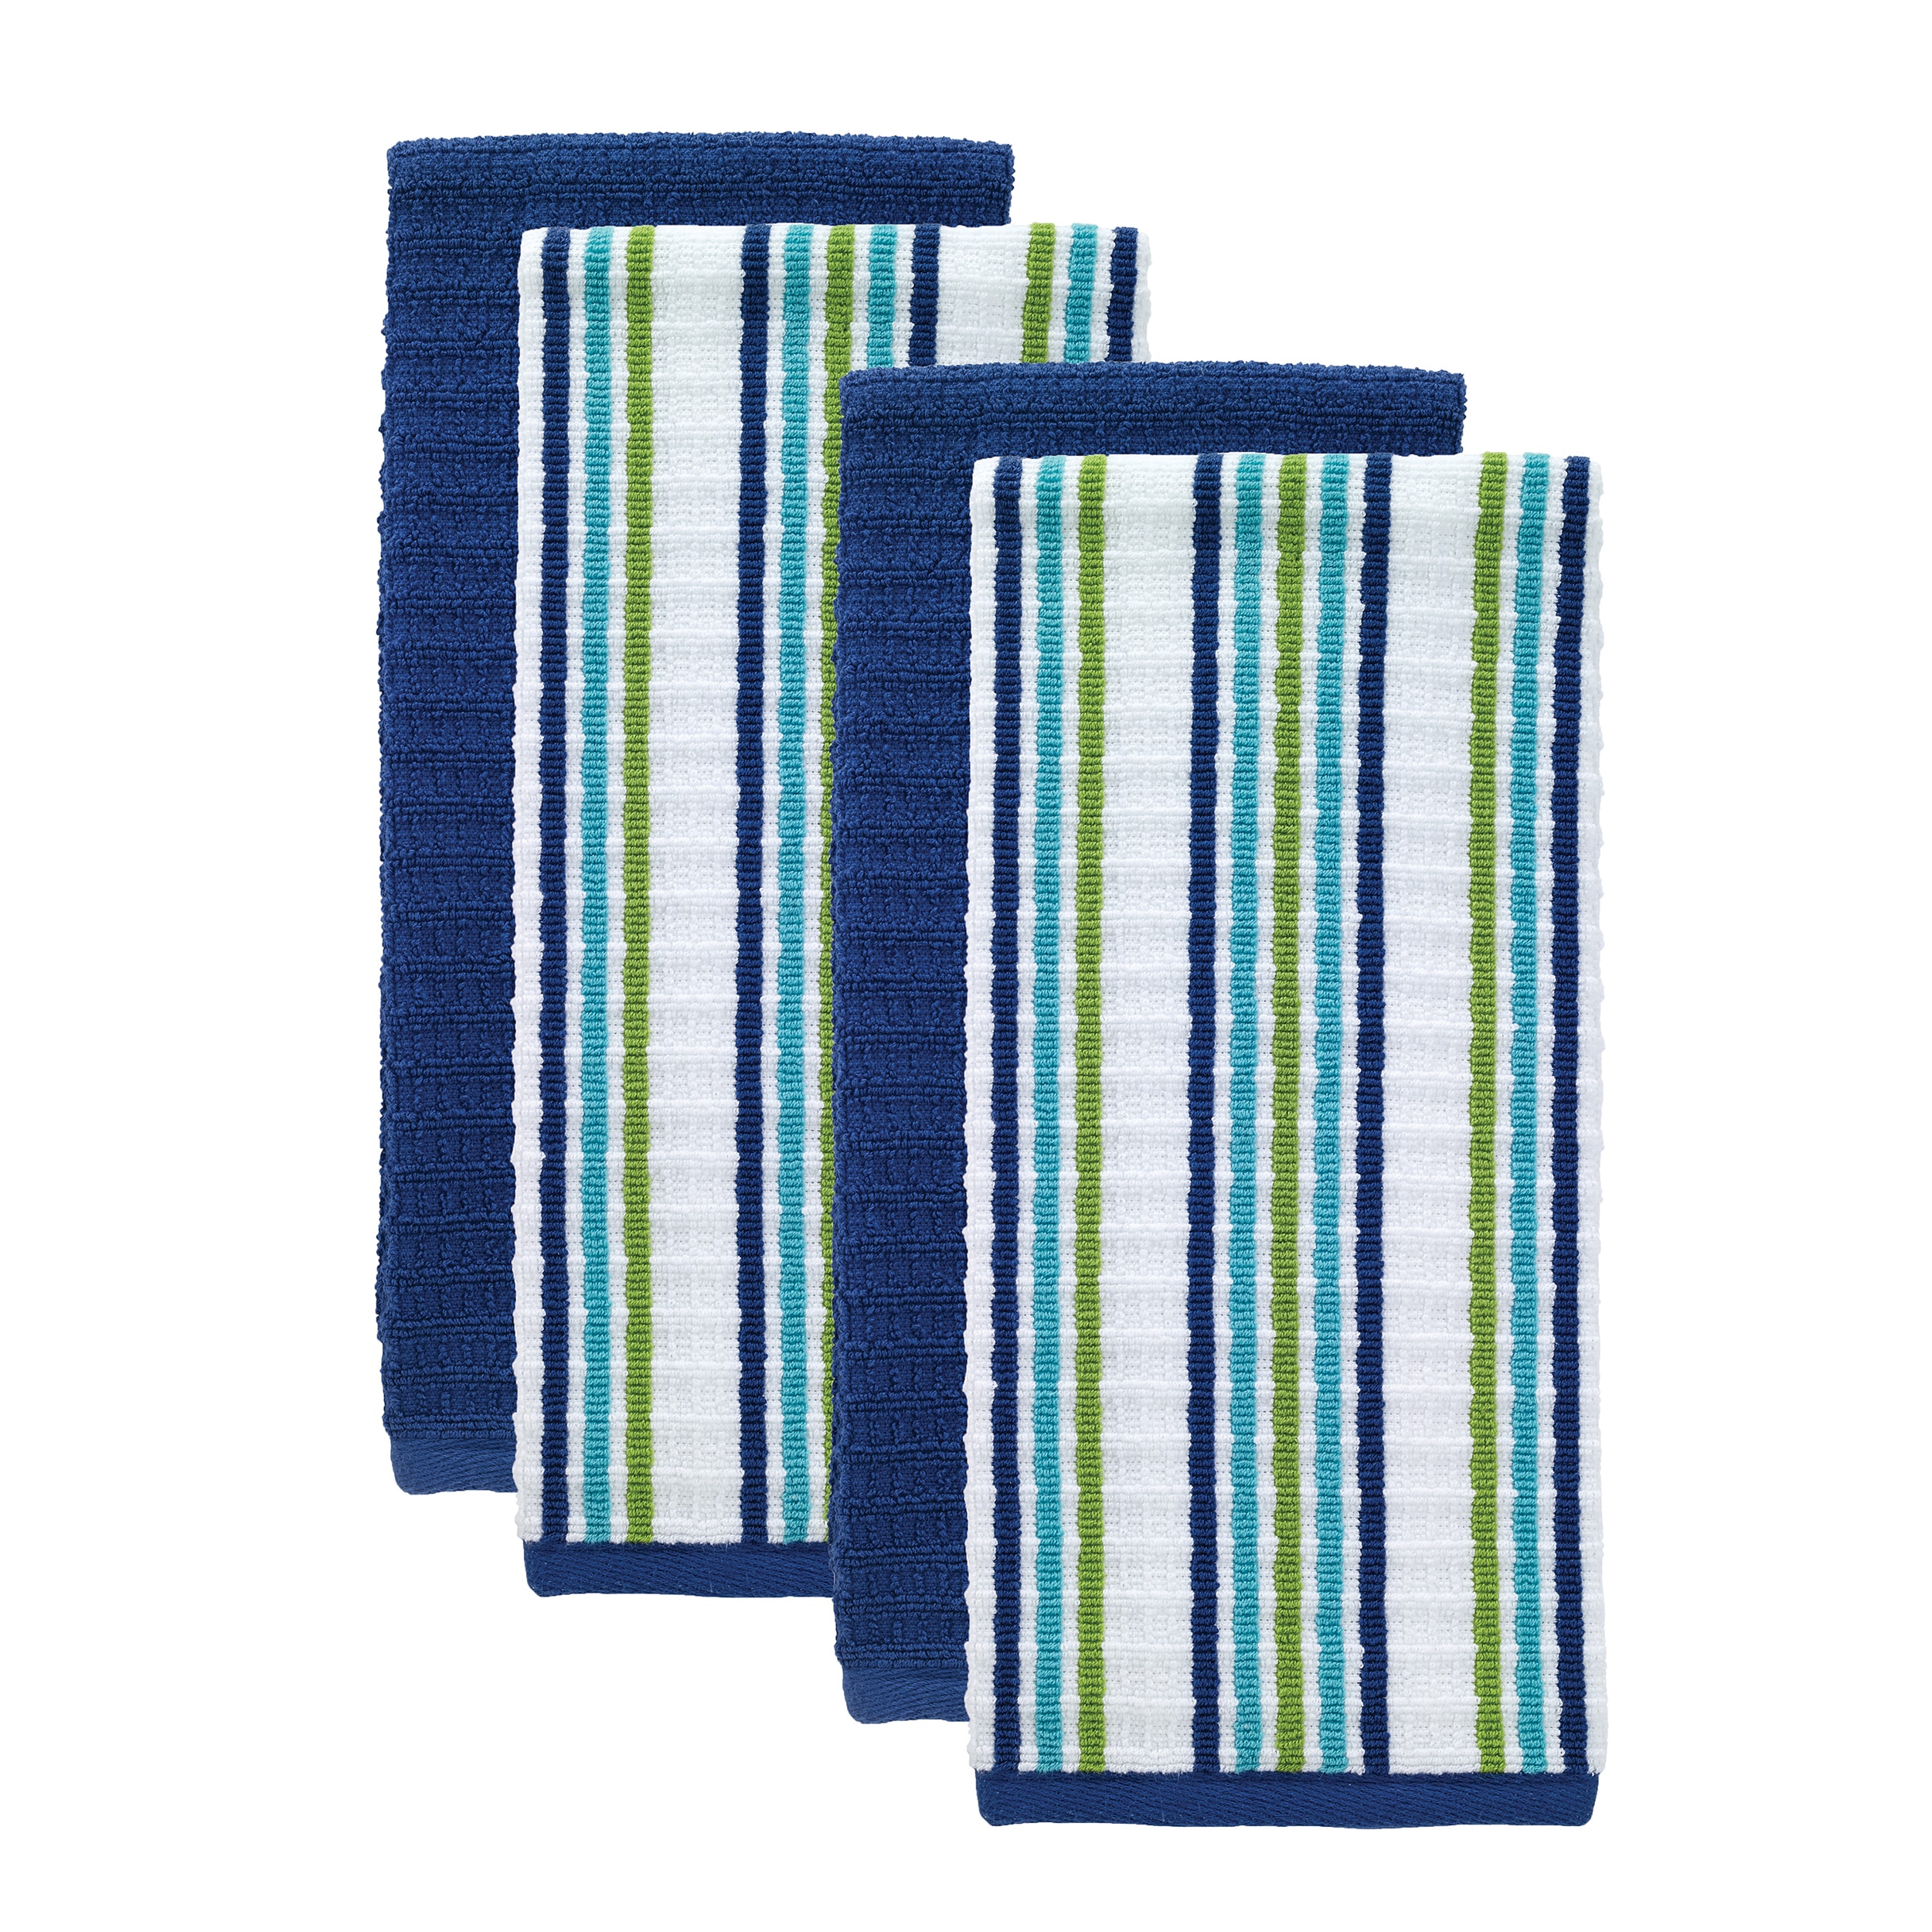 https://ak1.ostkcdn.com/images/products/15872033/T-fal-Textiles-4-Pack-Solid-Stripe-Waffle-Terry-Kitchen-Dish-Towel-Set-83bab3cd-0bf6-4dc6-a4b5-340a3965a710.jpg